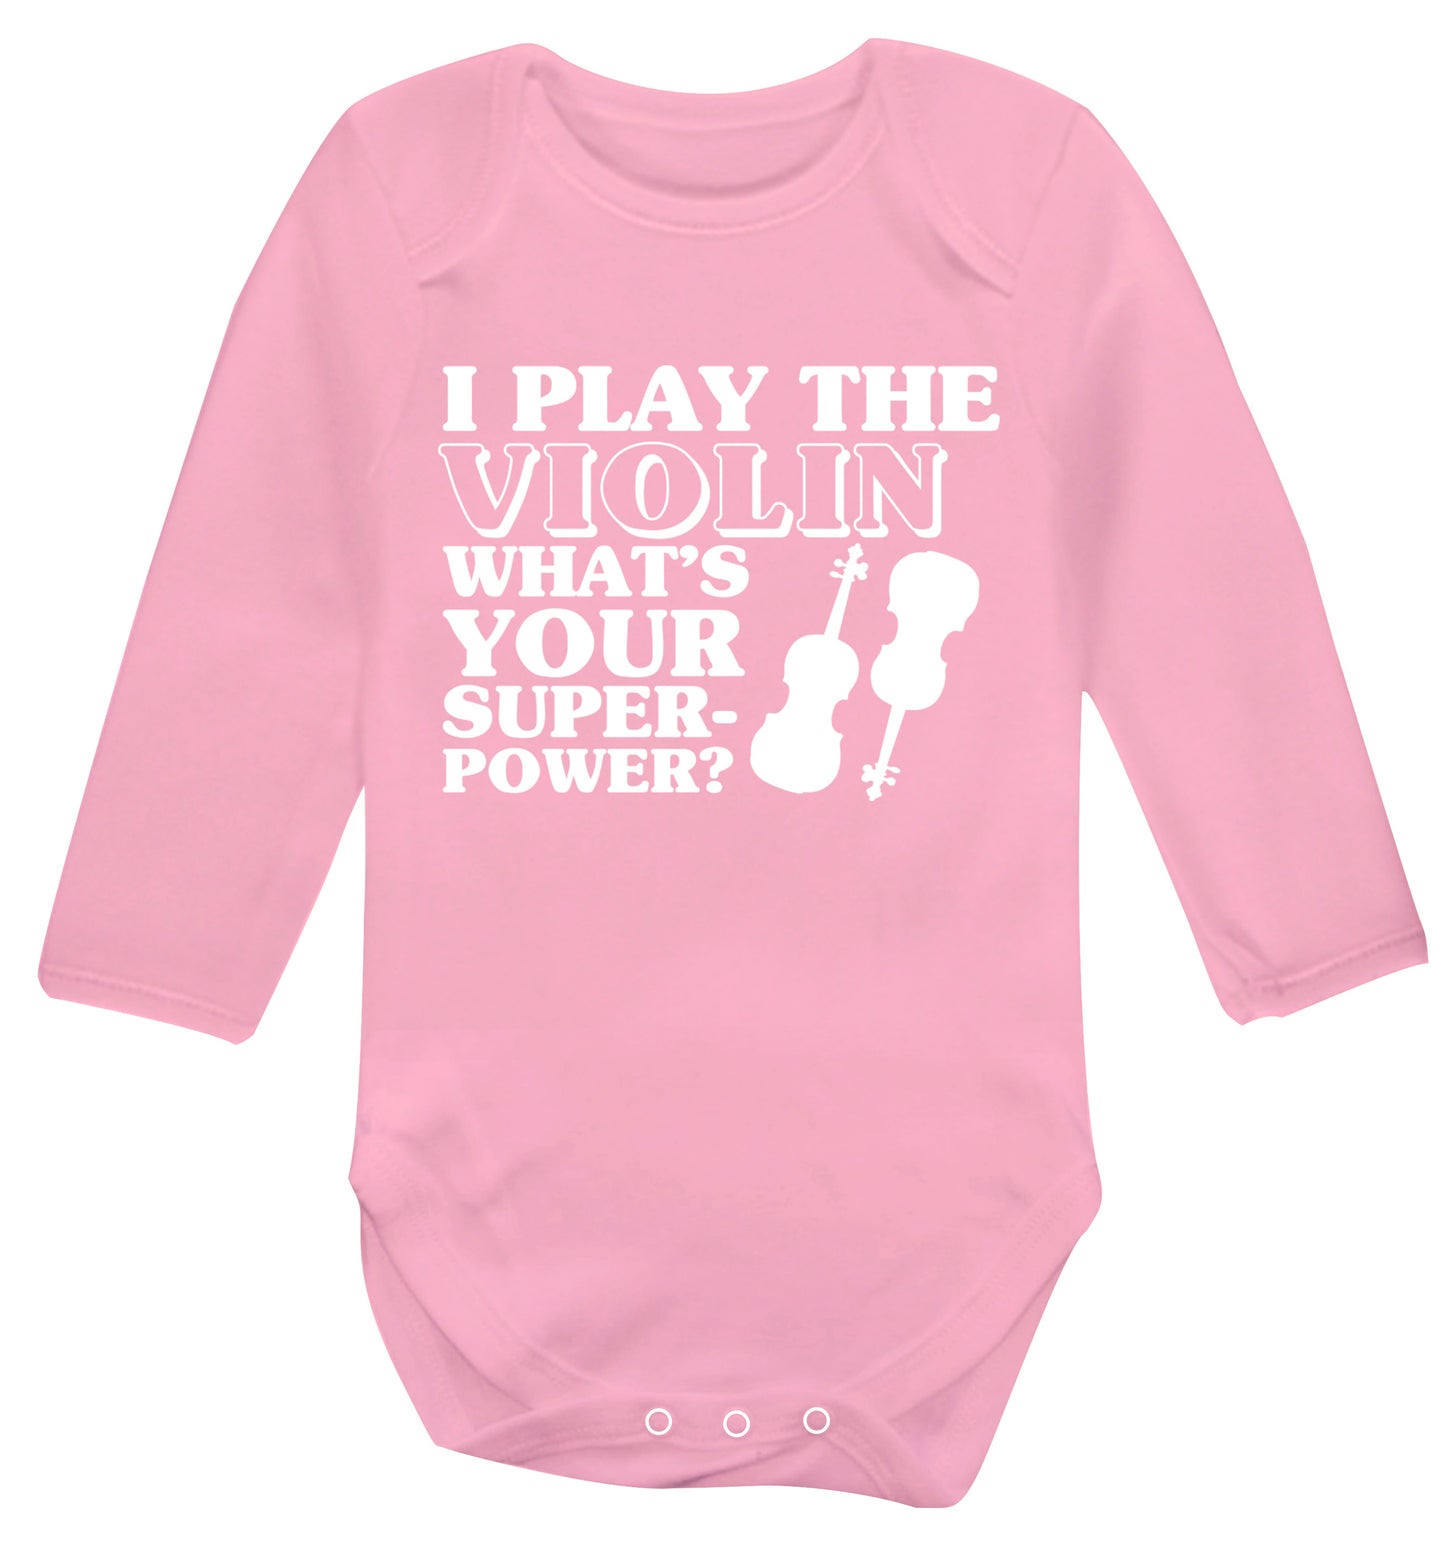 I Play Violin What's Your Superpower? Baby Vest long sleeved pale pink 6-12 months